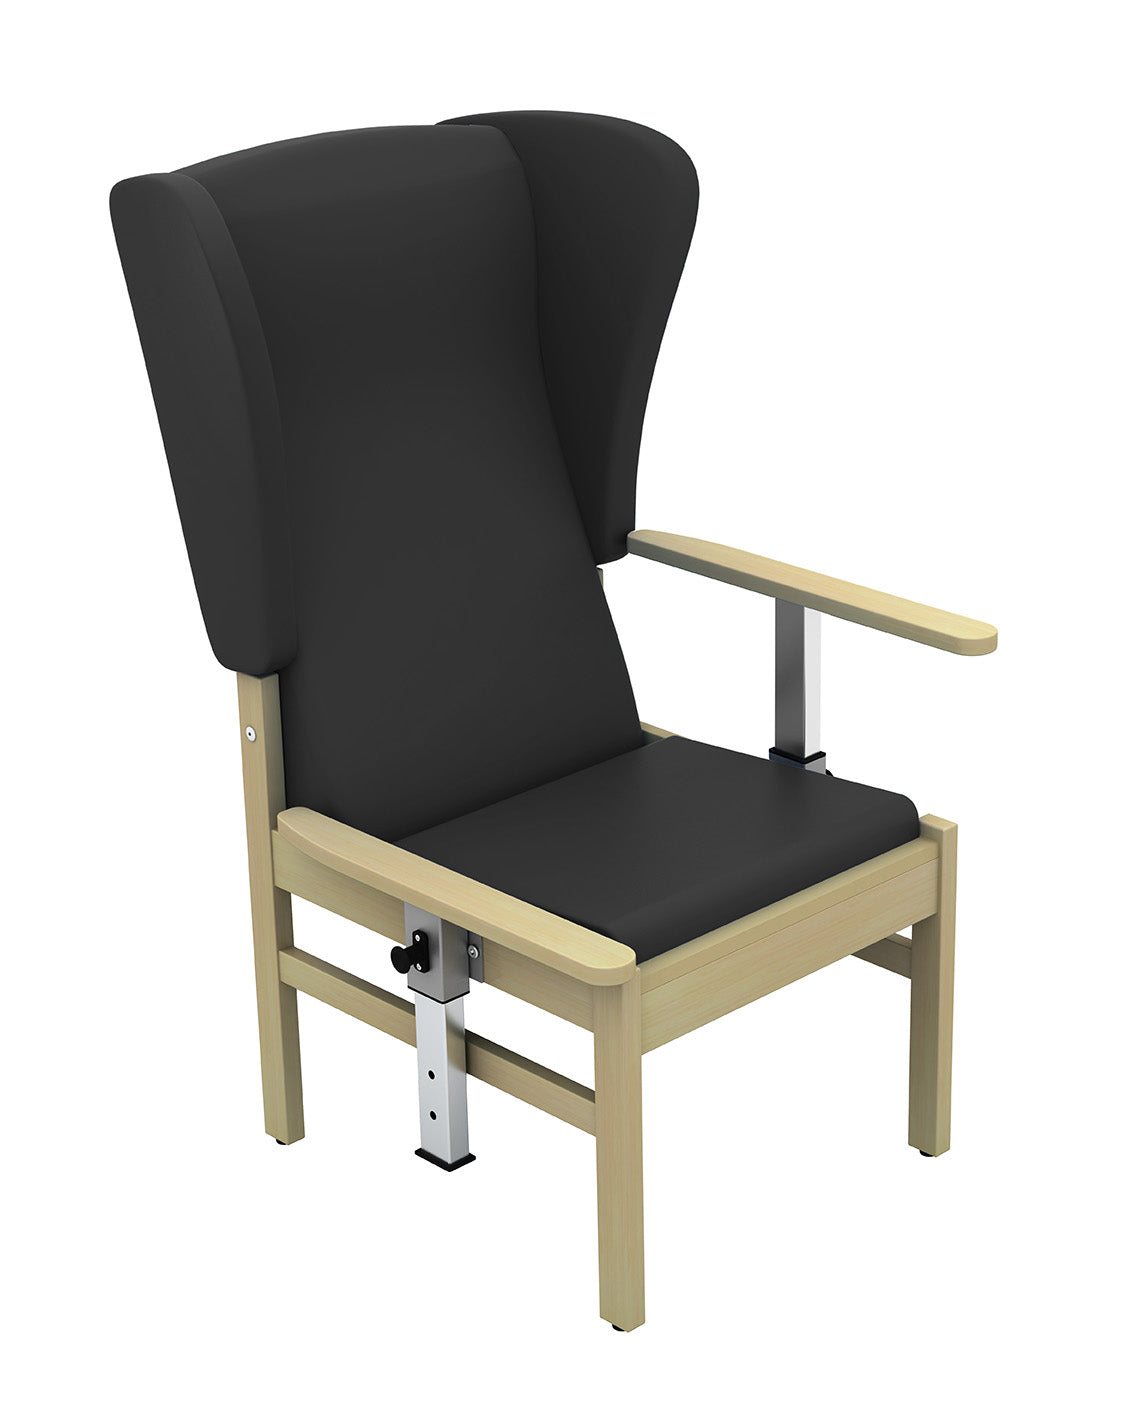 Sunflower - Atlas Patient High Back Arm Chair with Wings and Drop Arms